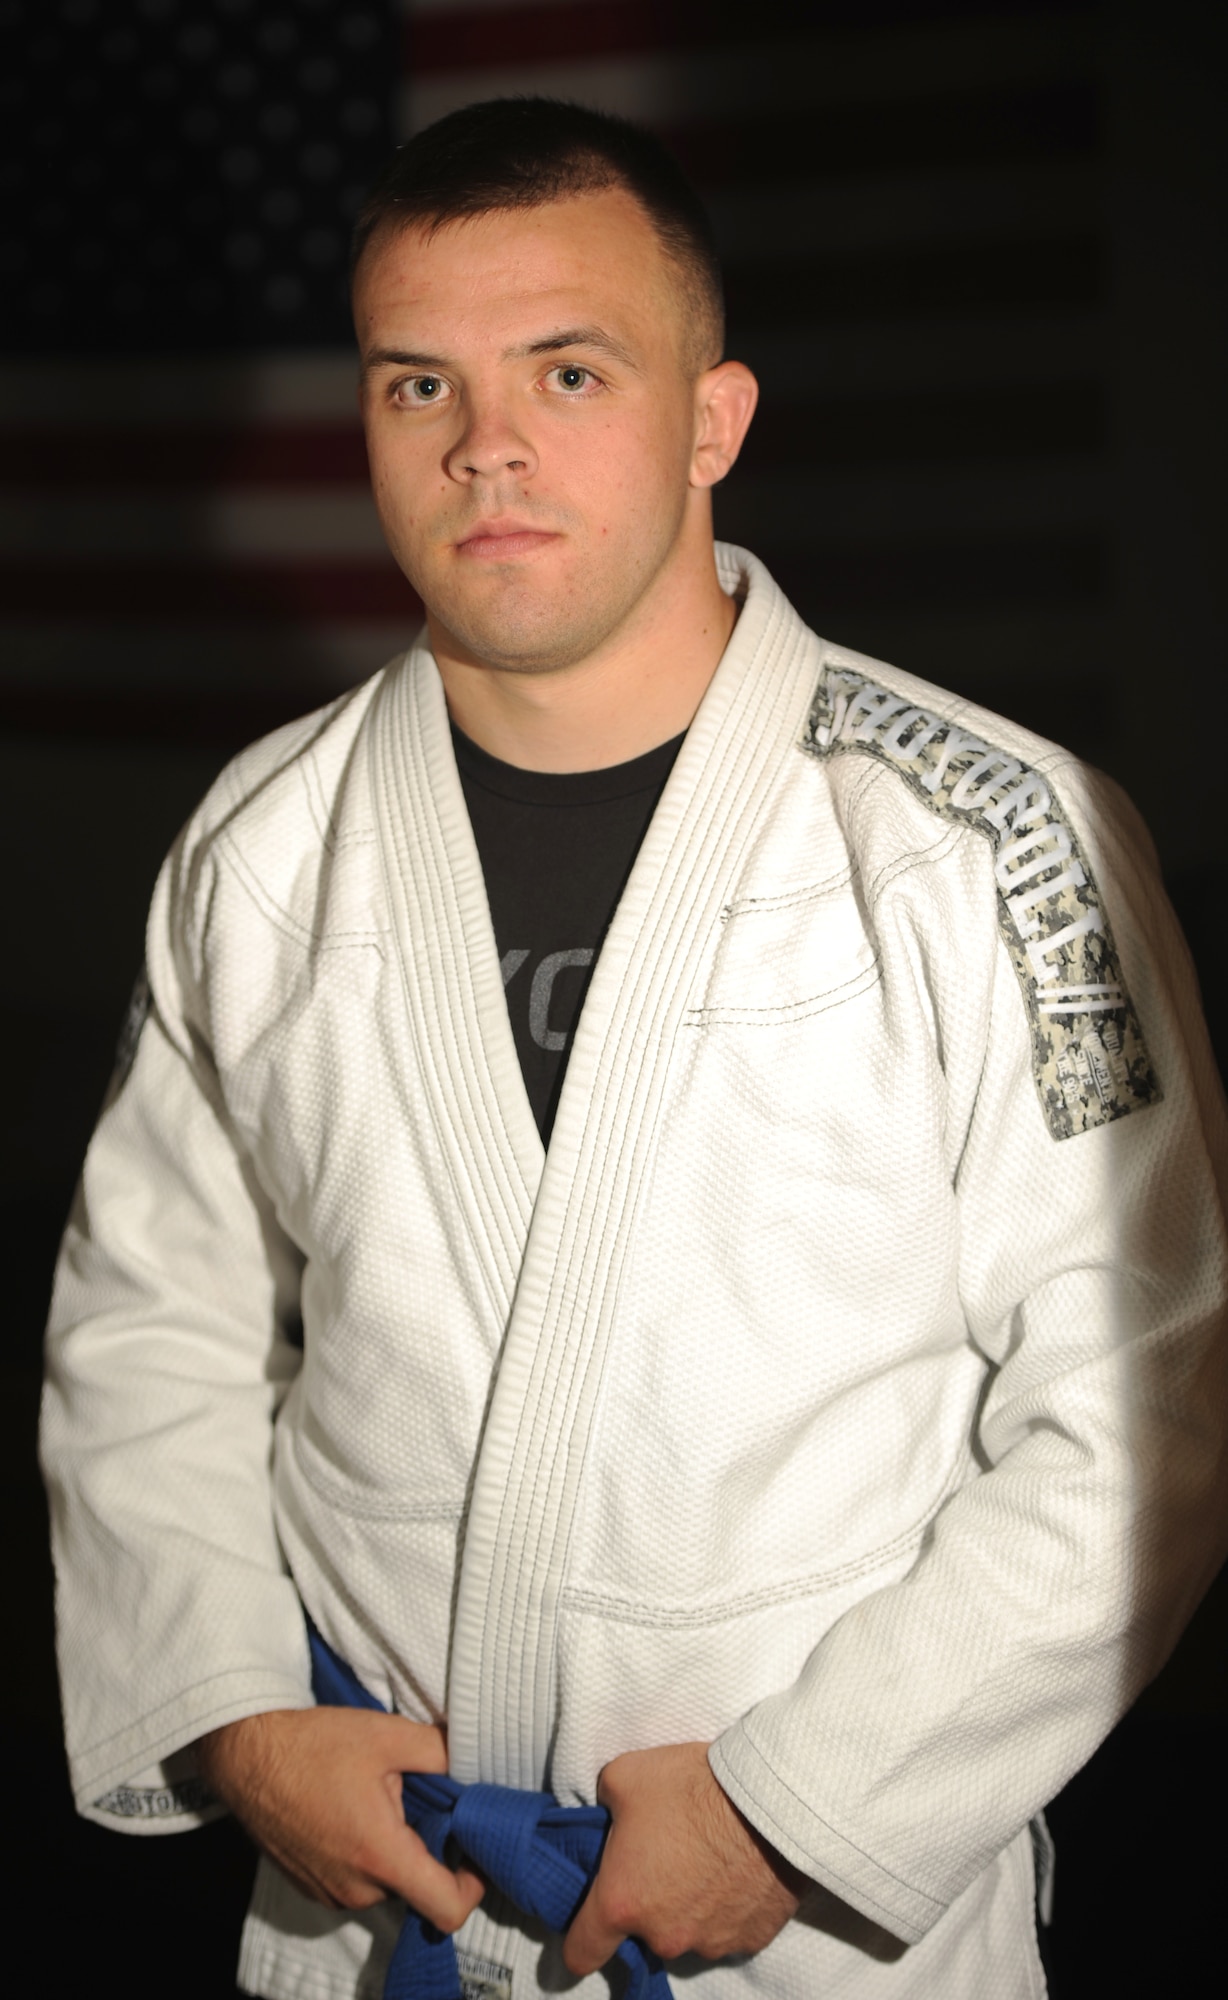 Airman 1st Class Larry, 48th Intelligence Squadron mission system technician, poses in a Brazilian Jiu Jitsu outfit at Beale Air Force Base, California, July 7, 2015. (U.S. Air Force photo by Airman Preston L. Cherry)
